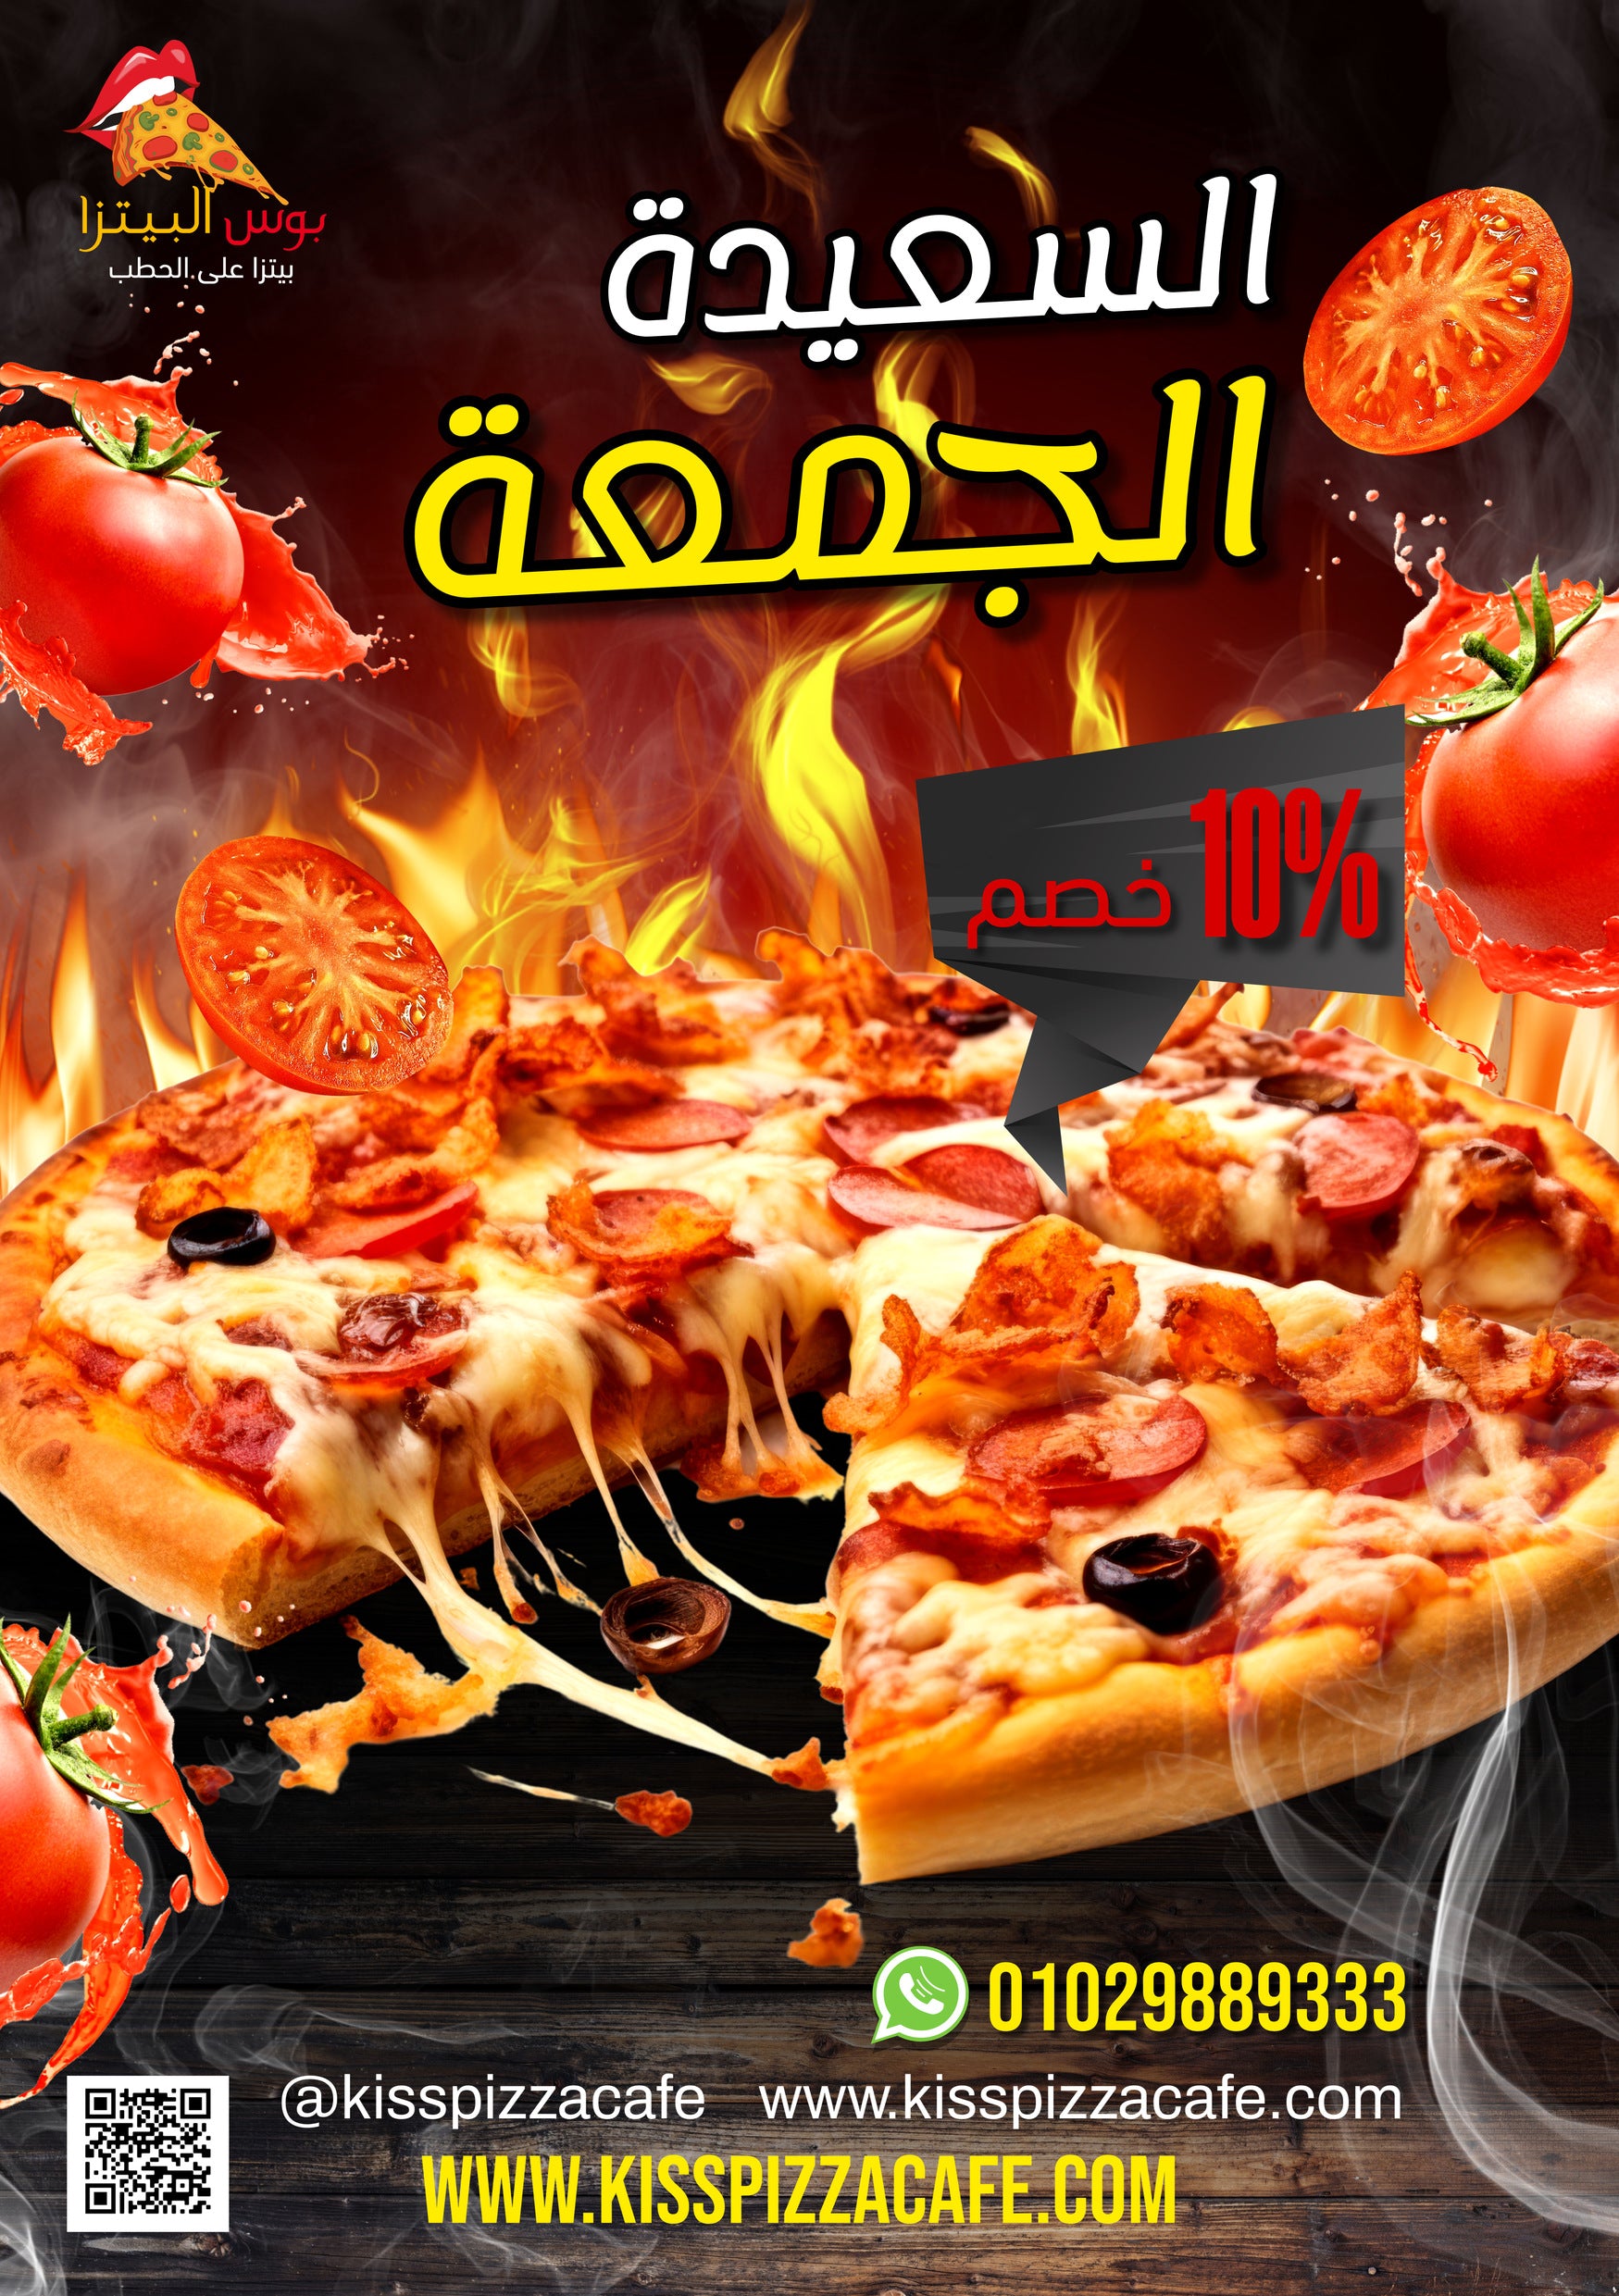 Kiss Pizza Friday Offer